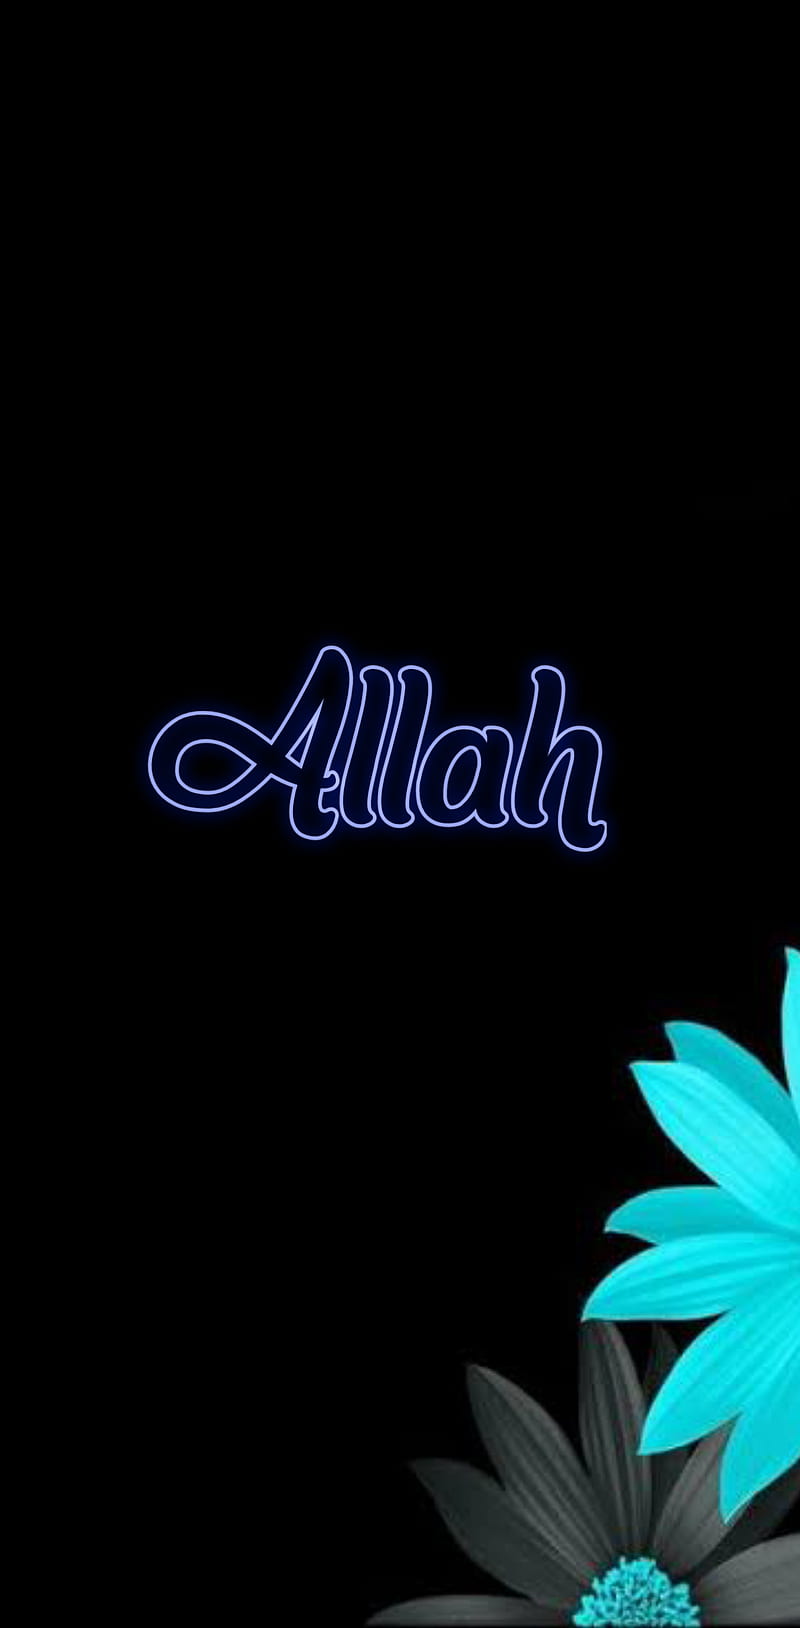 Top 10 Best Allah Name iPhone Wallpapers [ HQ ]